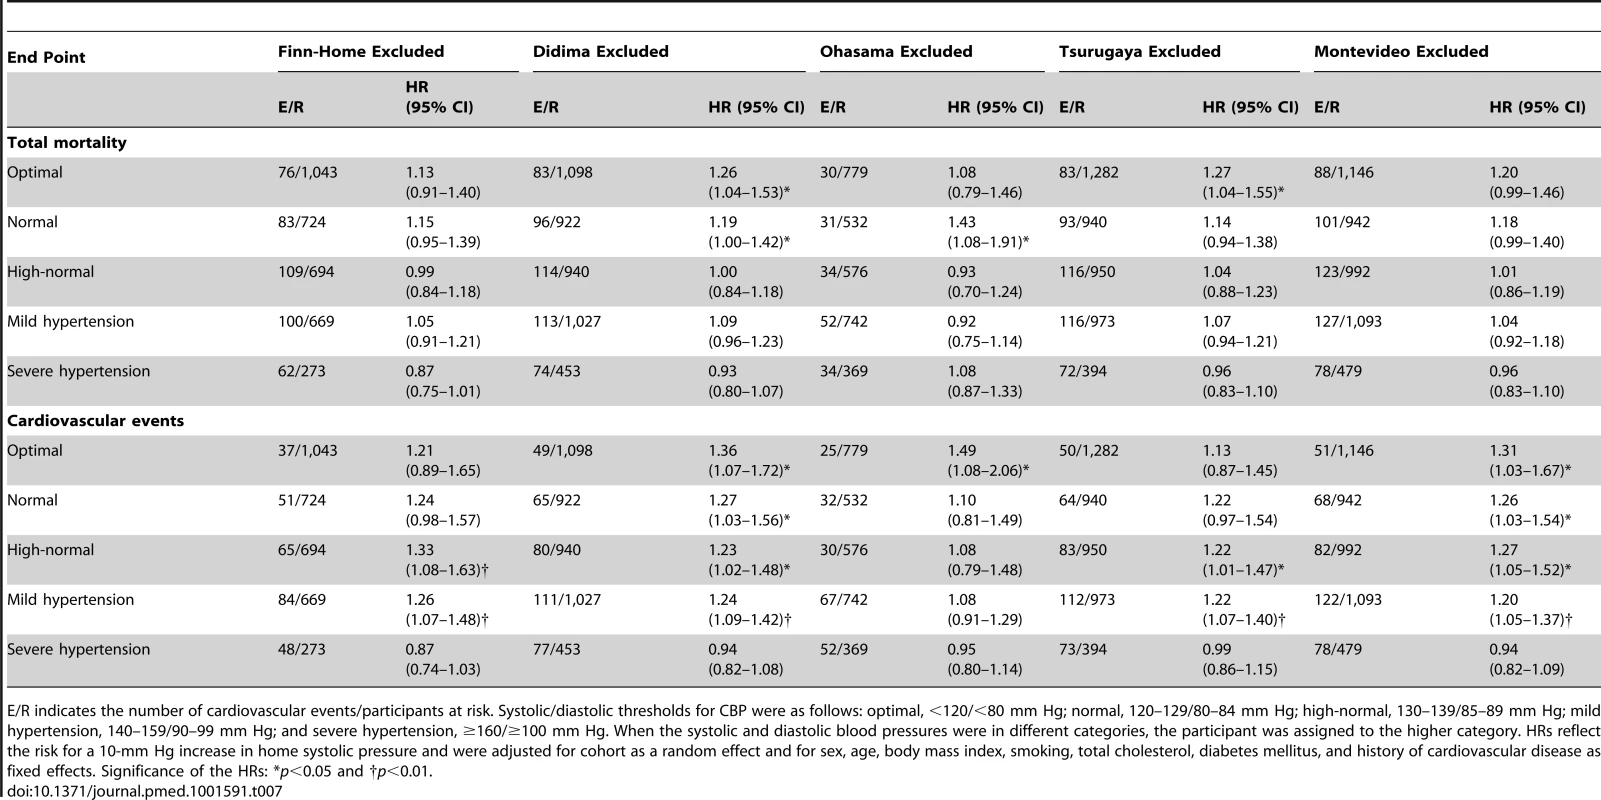 Sensitivity analysis for total mortality and cardiovascular events with one cohort excluded.